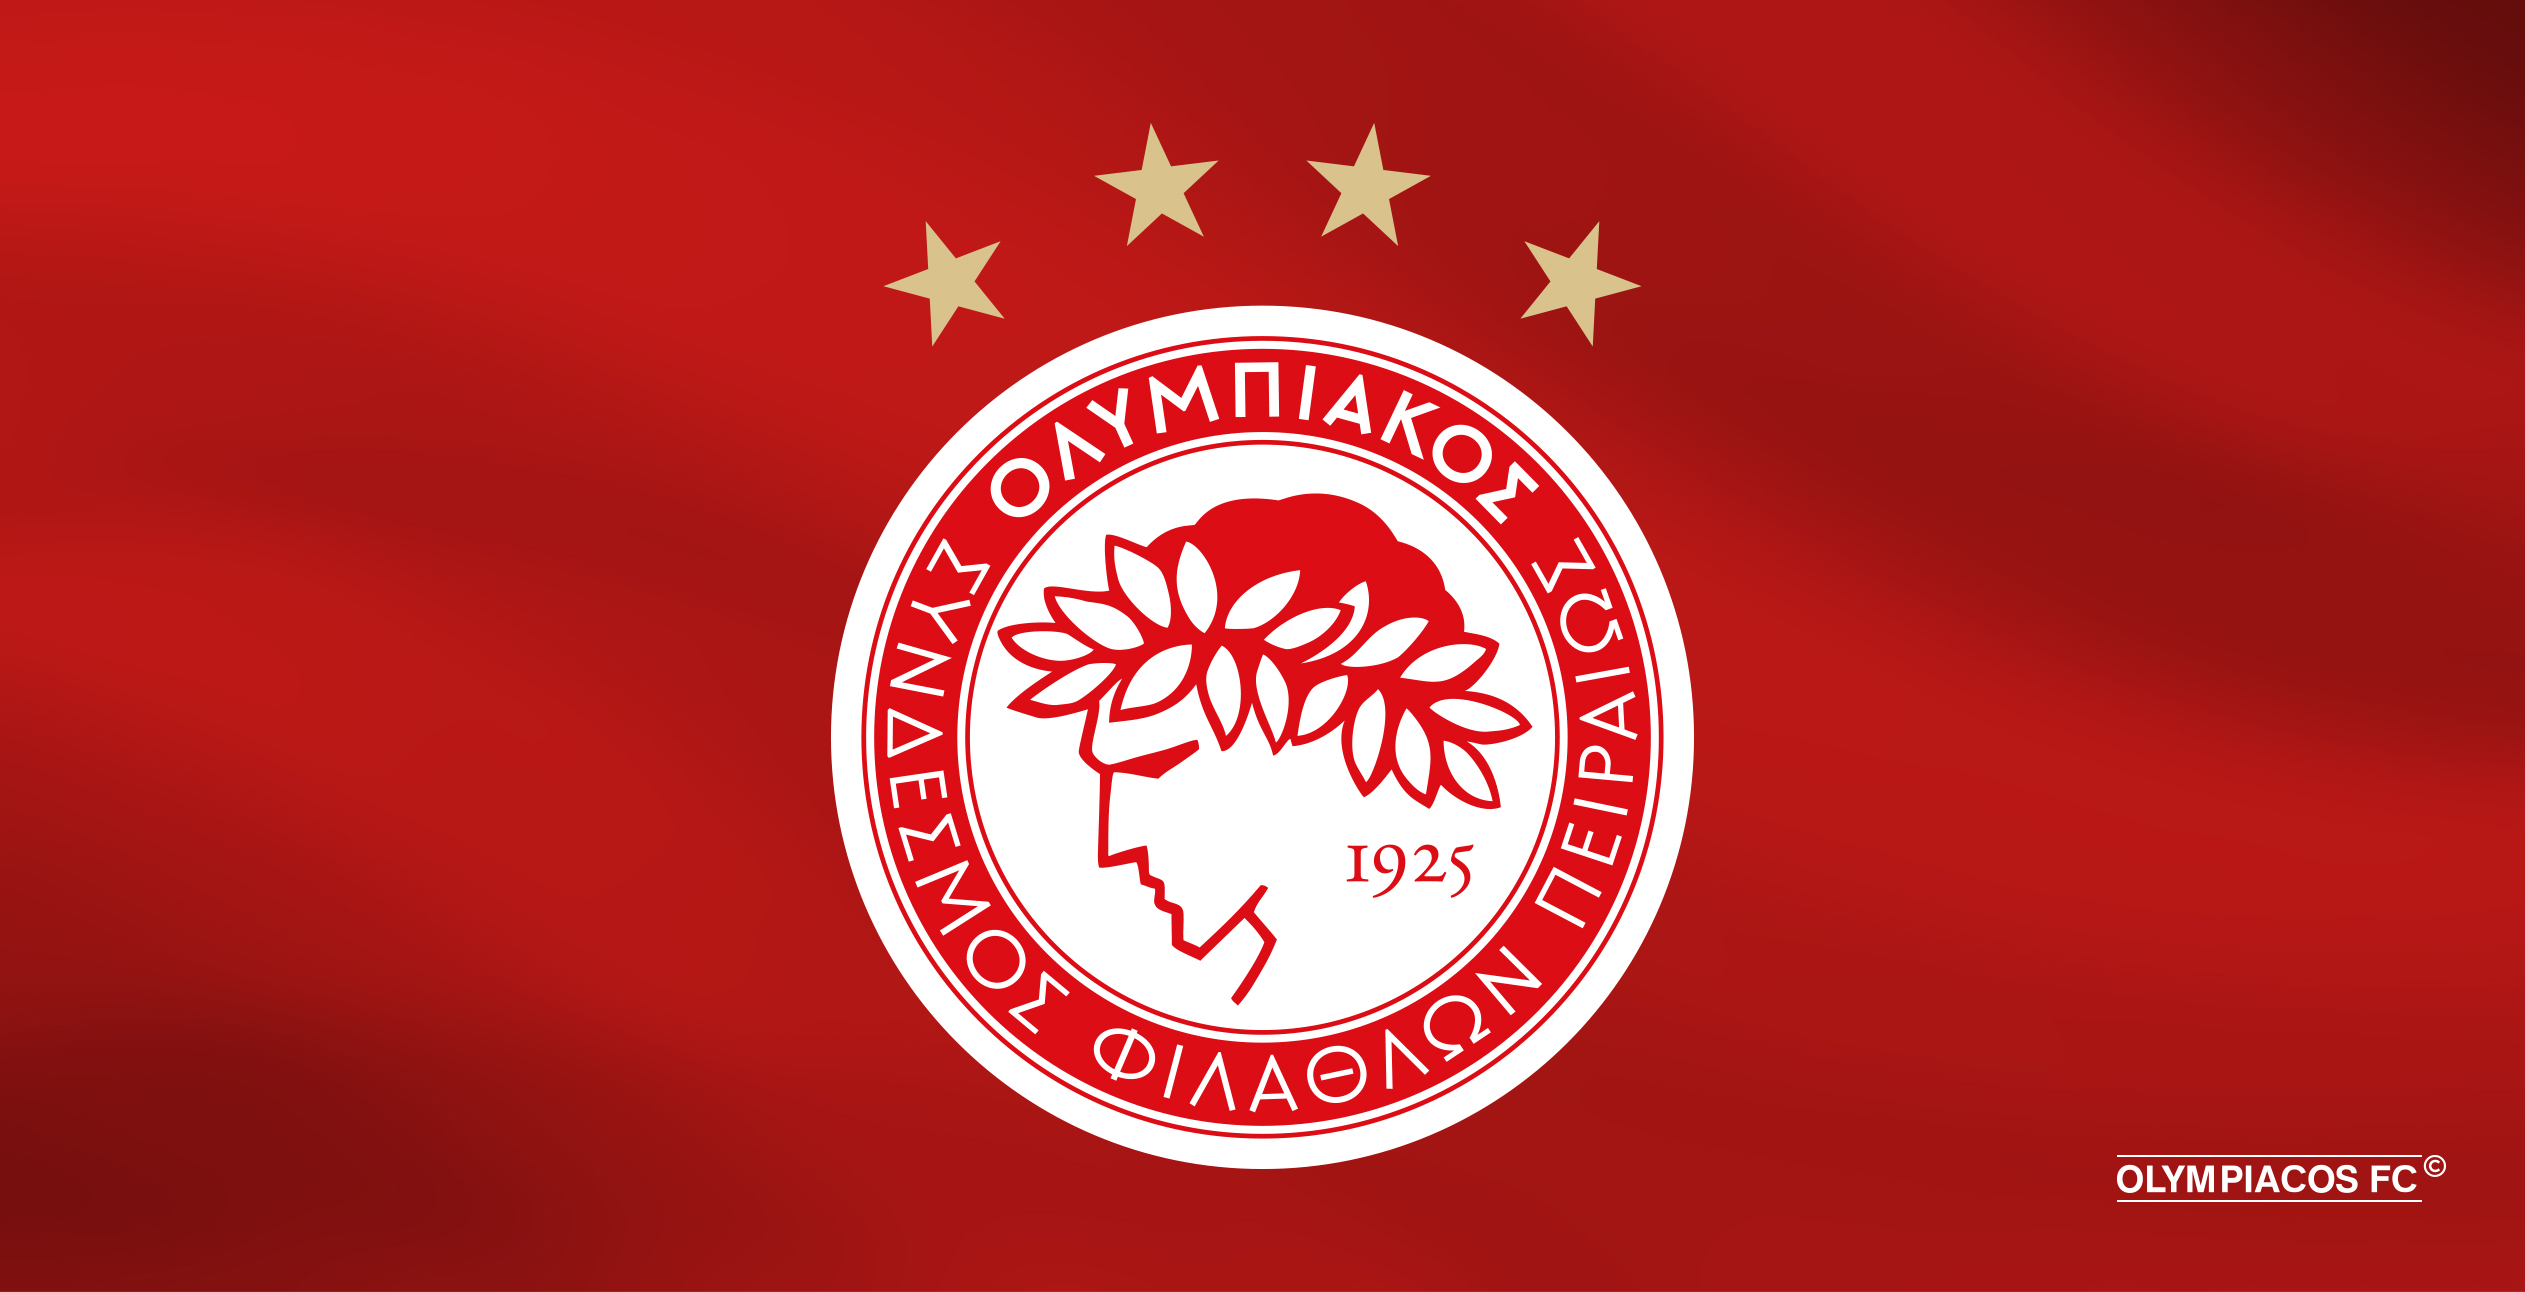 Olympiacos FC – Announcement